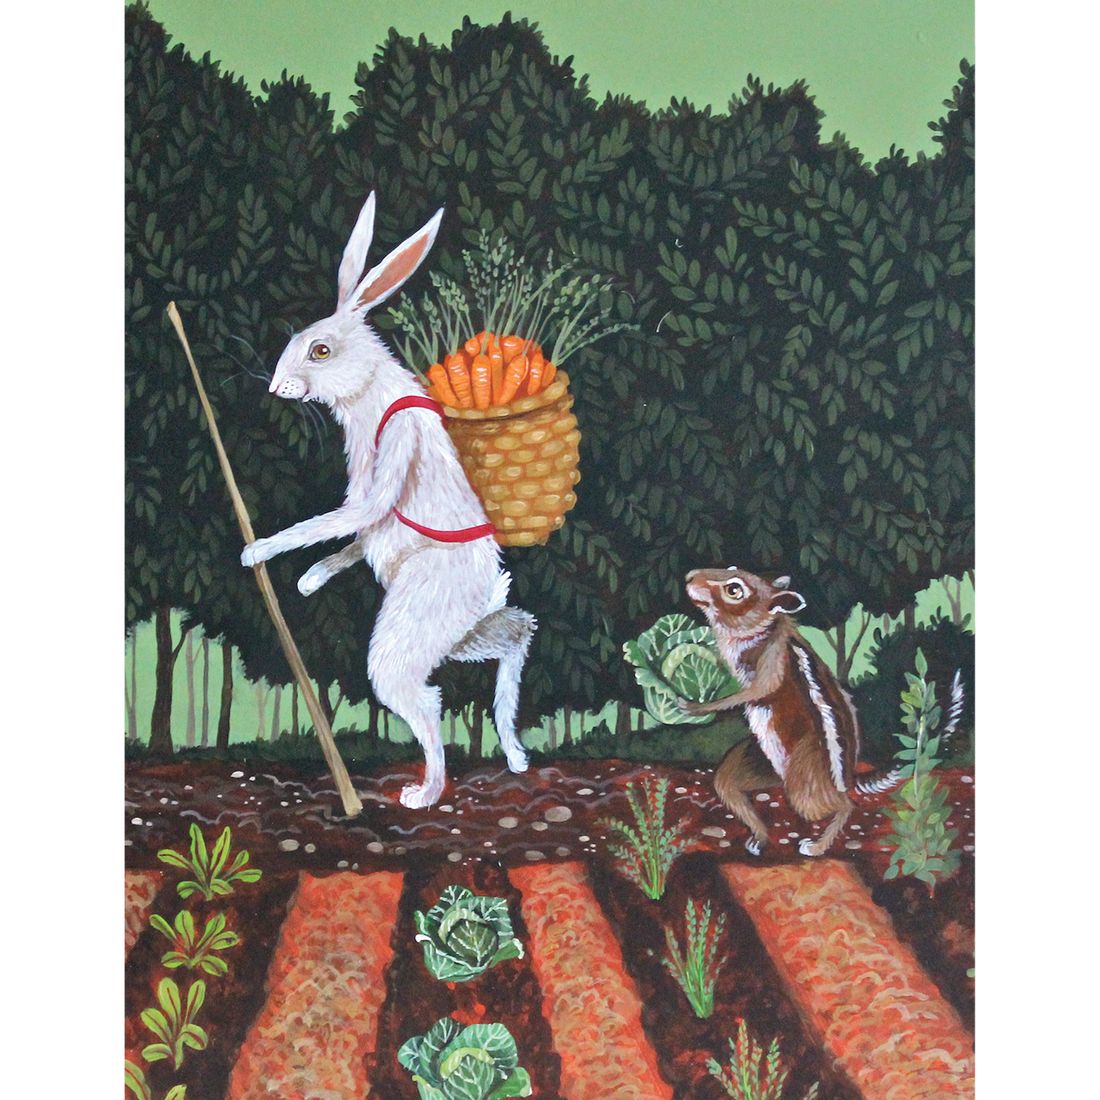 A whimsical illustration of a white rabbit and a striped chipmunk walking through a garden surrounded by lush greenery; the rabbit has a walking stick and a basket of carrots strapped to their back, and the chipmunk is carrying a head of cabbage.